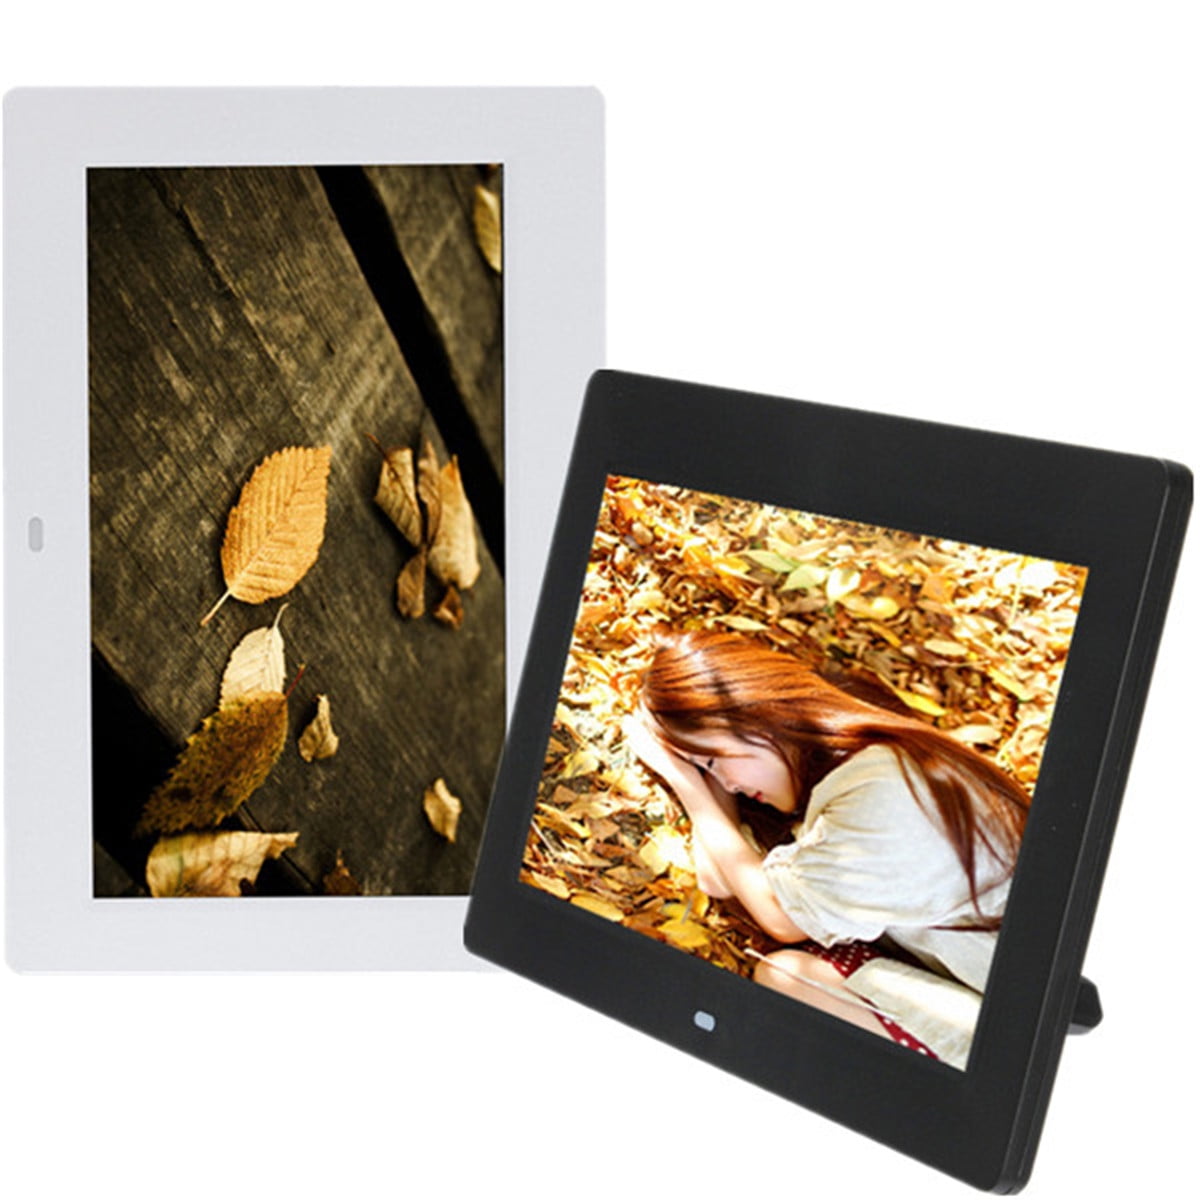 Digital Photo Frame With 4GB Built-in Memory 10 Inch, 45% OFF